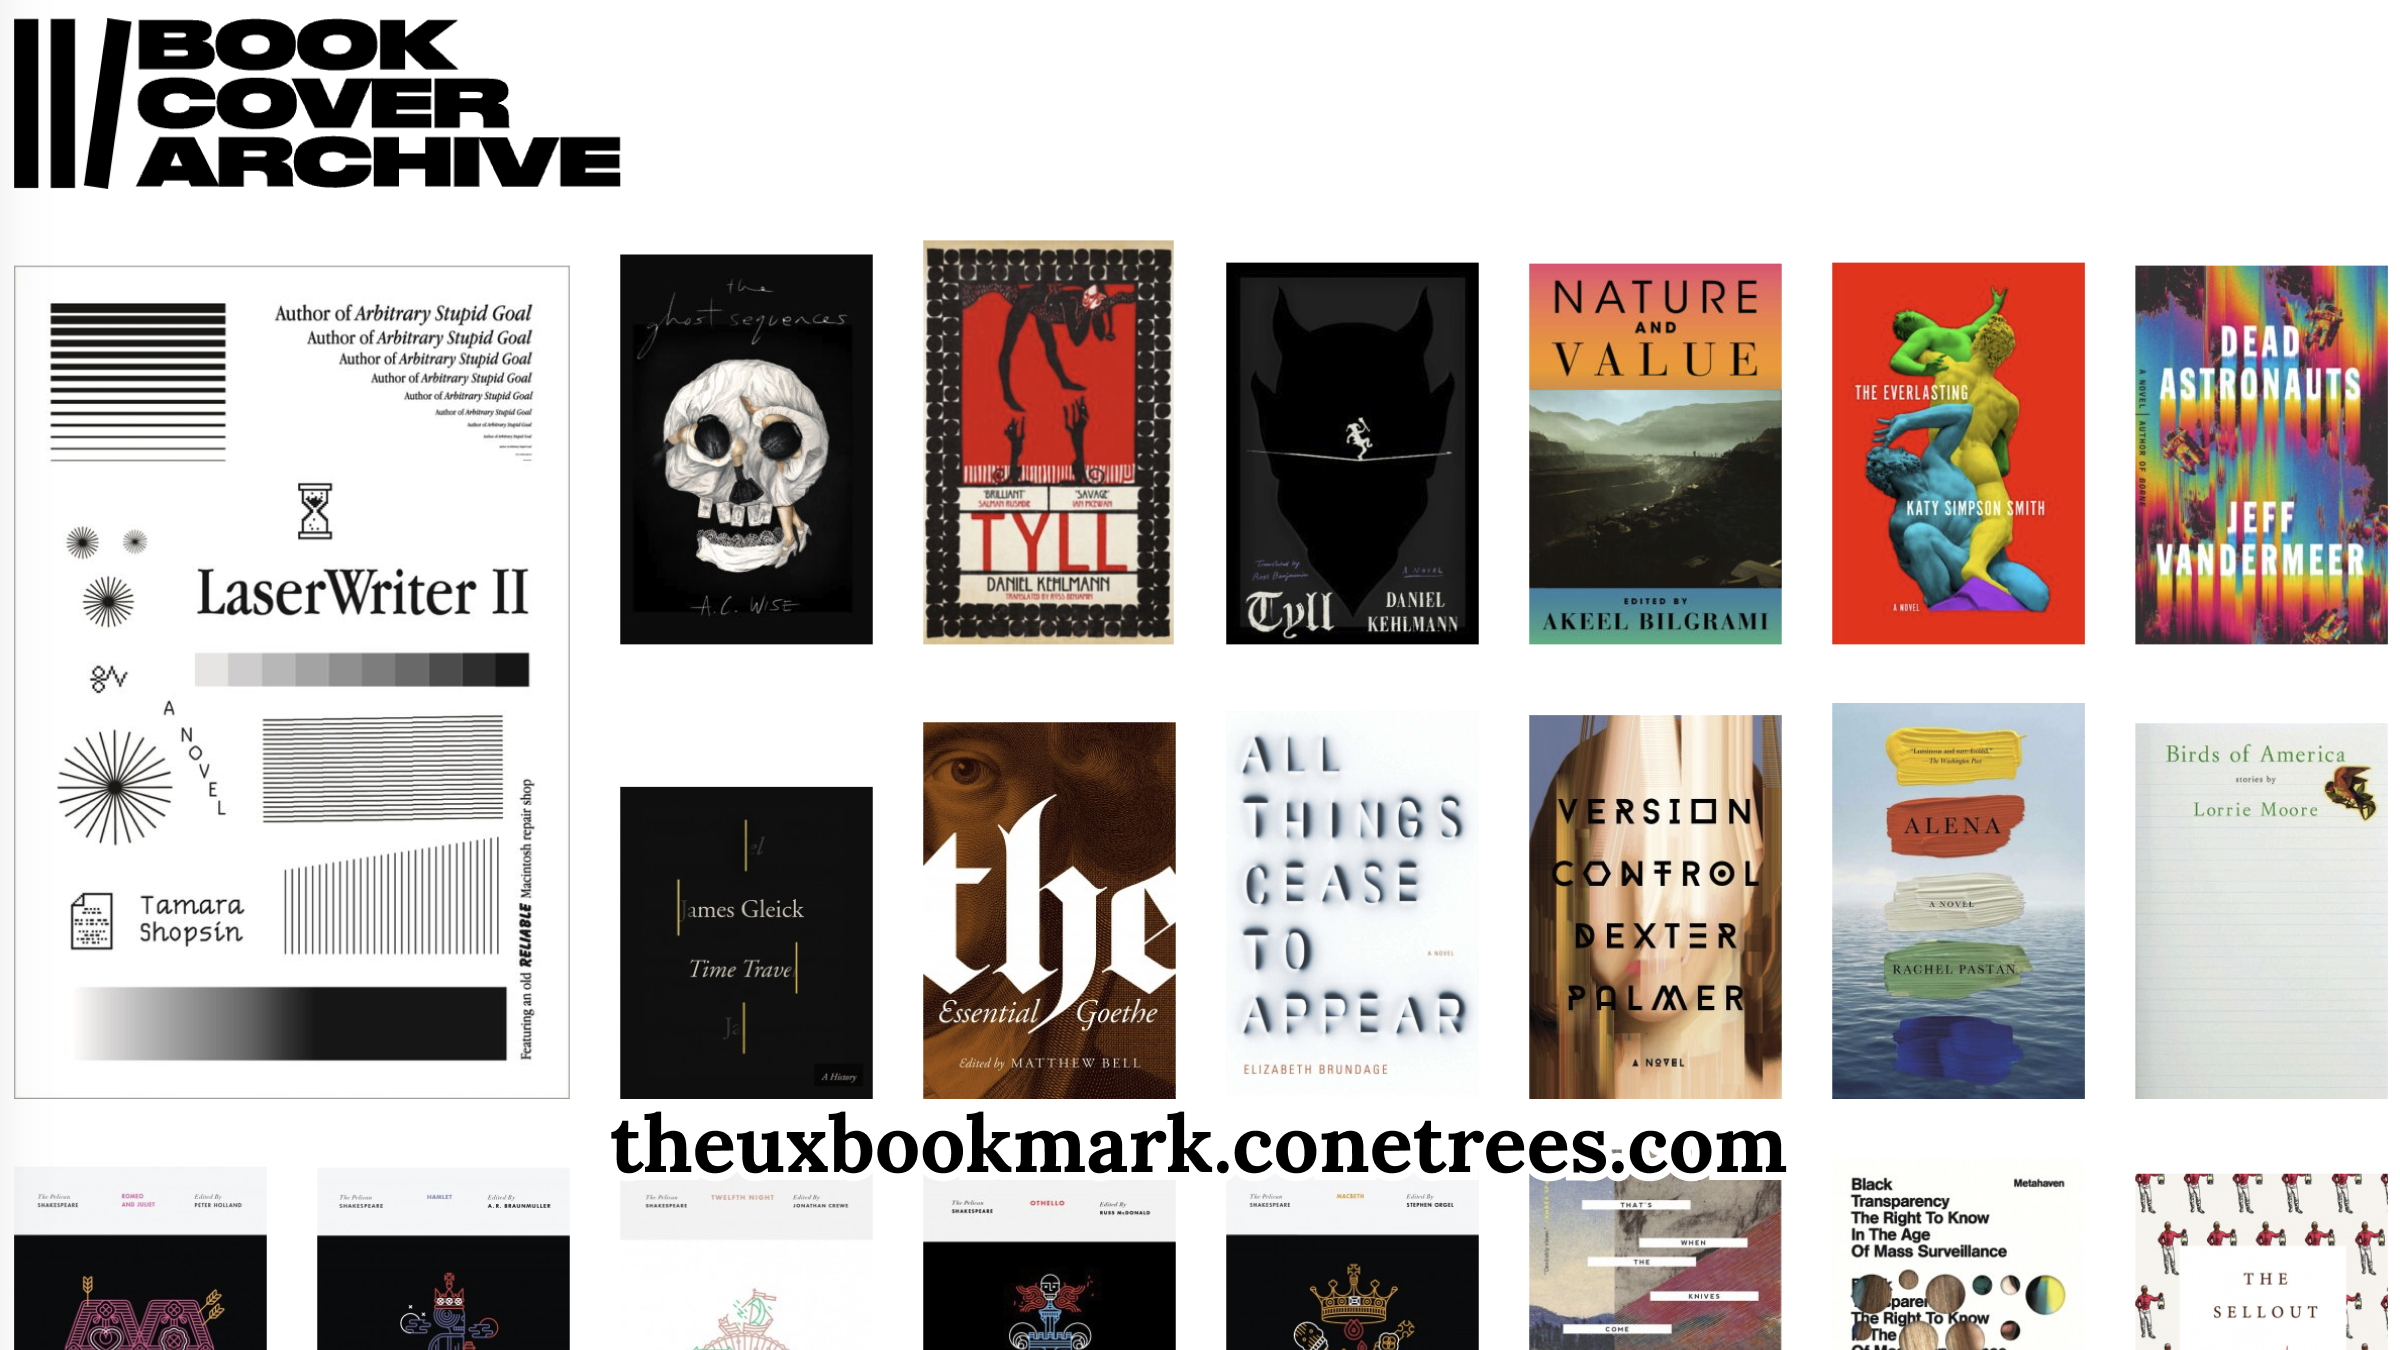 The Book Cover Archive